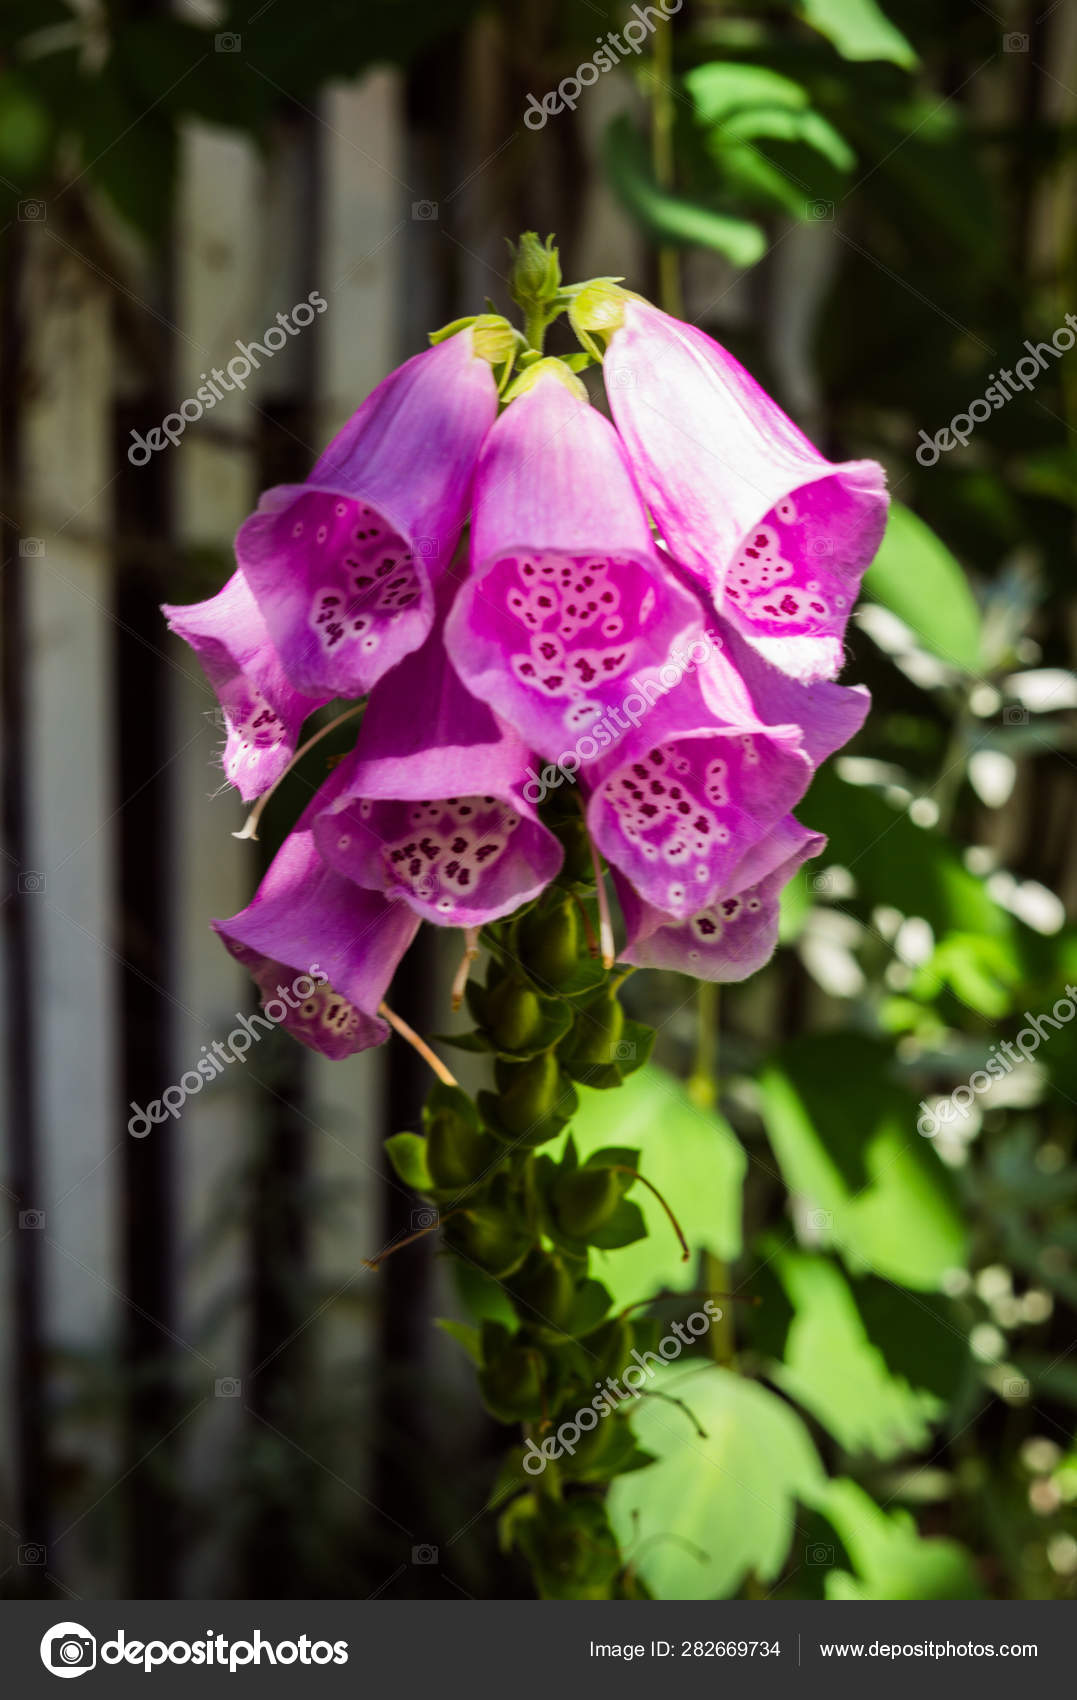 Blooming Pink Foxglove Flower In The Summer Garden Close Up Beautiful Flower During Flowering Stock Photo C Obraz 282669734